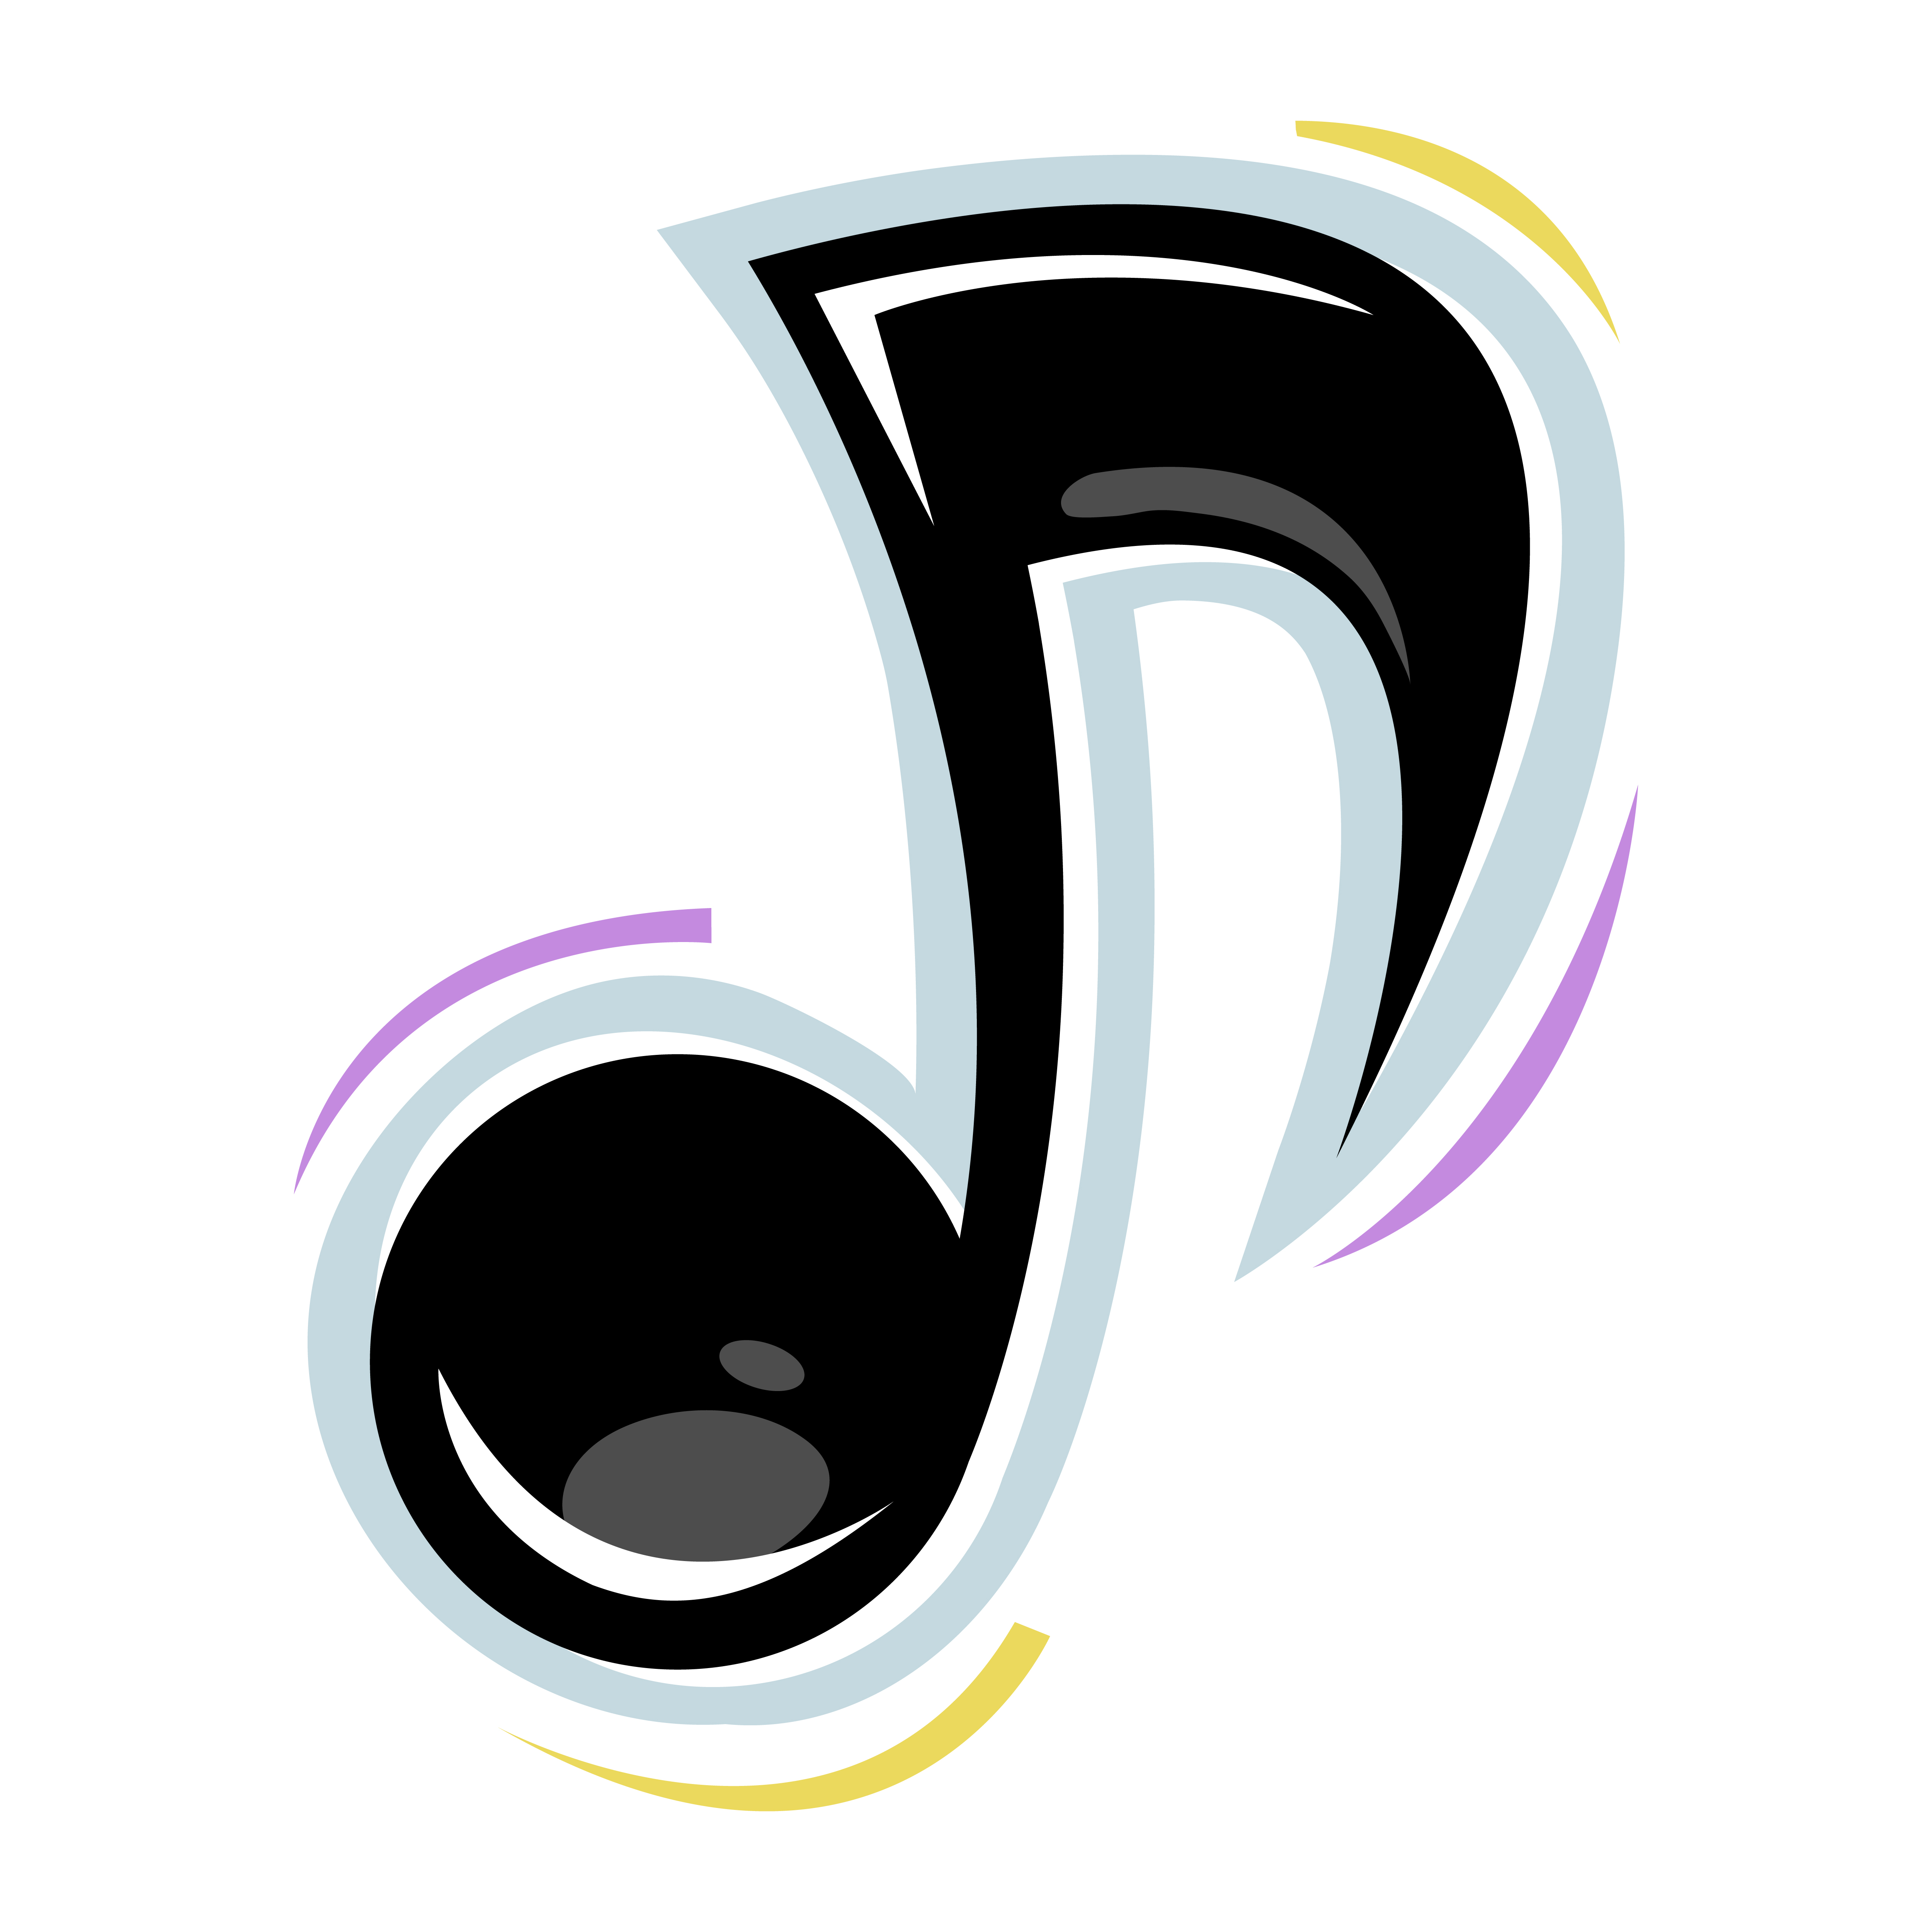 Download Music notes vector icon - Download Free Vectors, Clipart ...